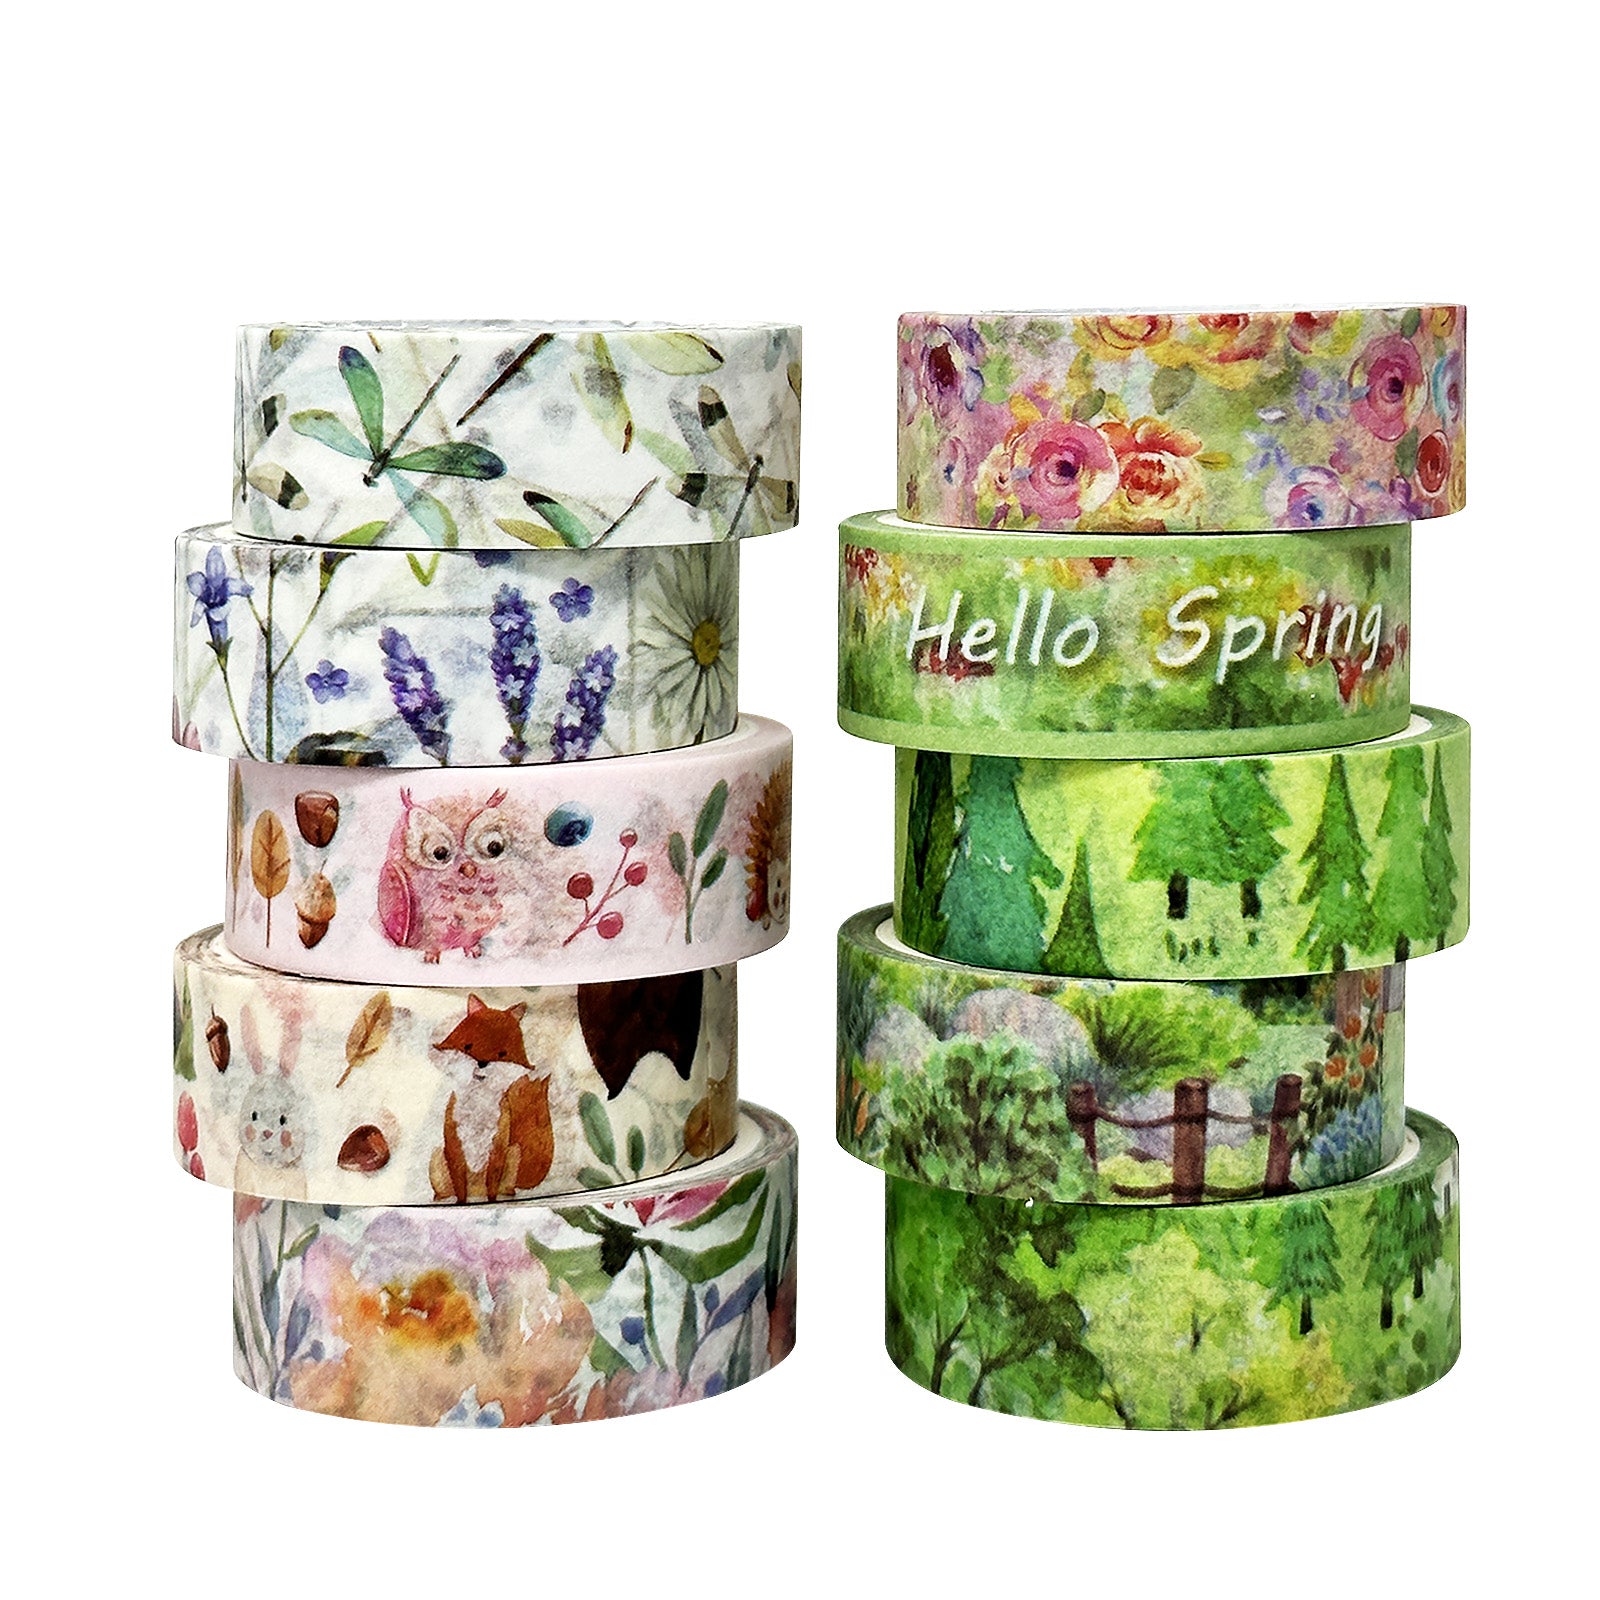 Wrapables Decorative Washi Tape for Scrapbooking, Stationery, Diary, Card Making (10 Rolls), Hello Spring